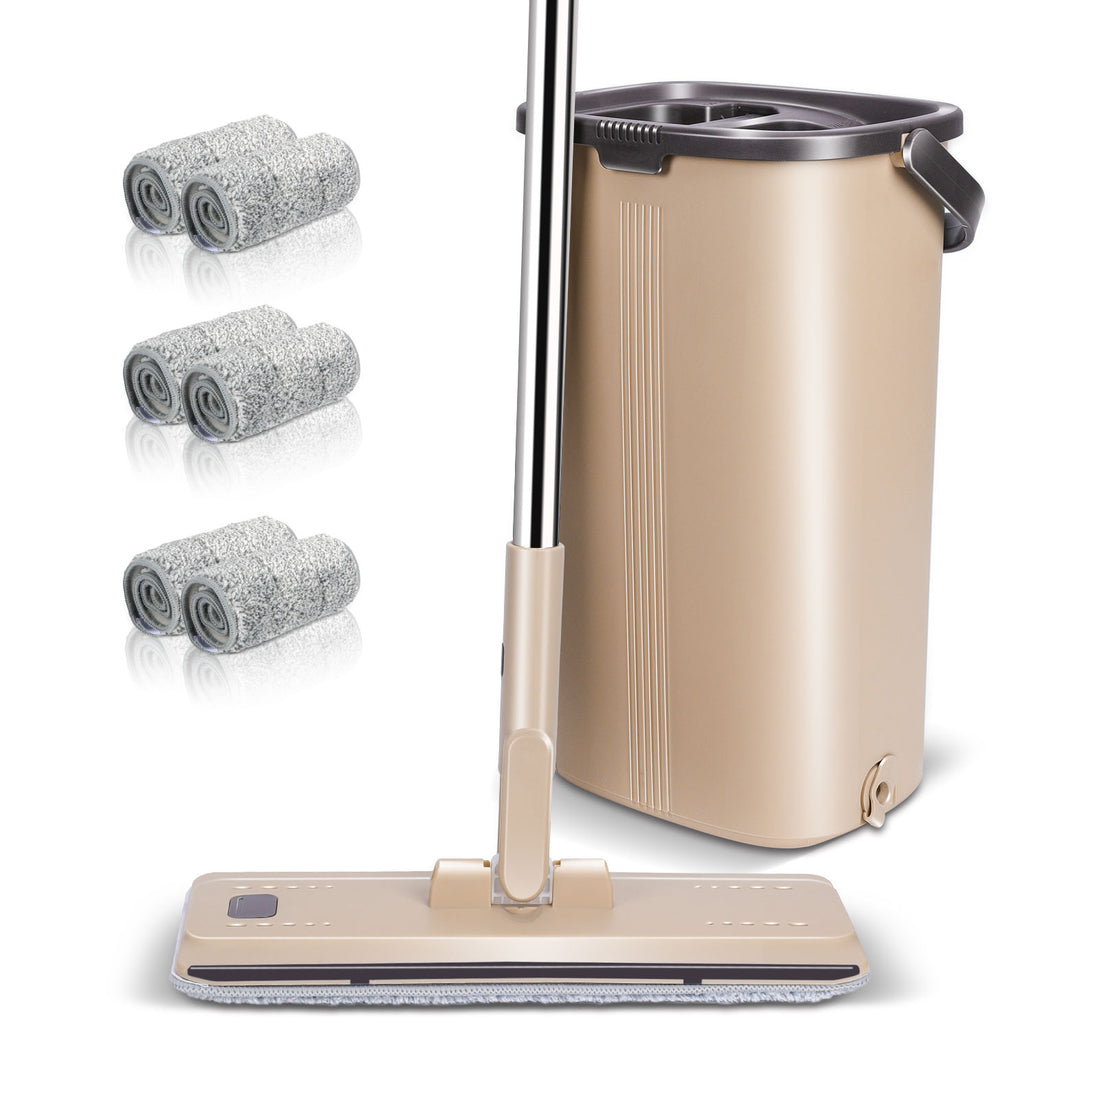 Masthome Flat Mop and Bucket with Wringer Set, Self Cleaning Flat Mop and Bucket System, 6 Washable Microfiber Pads